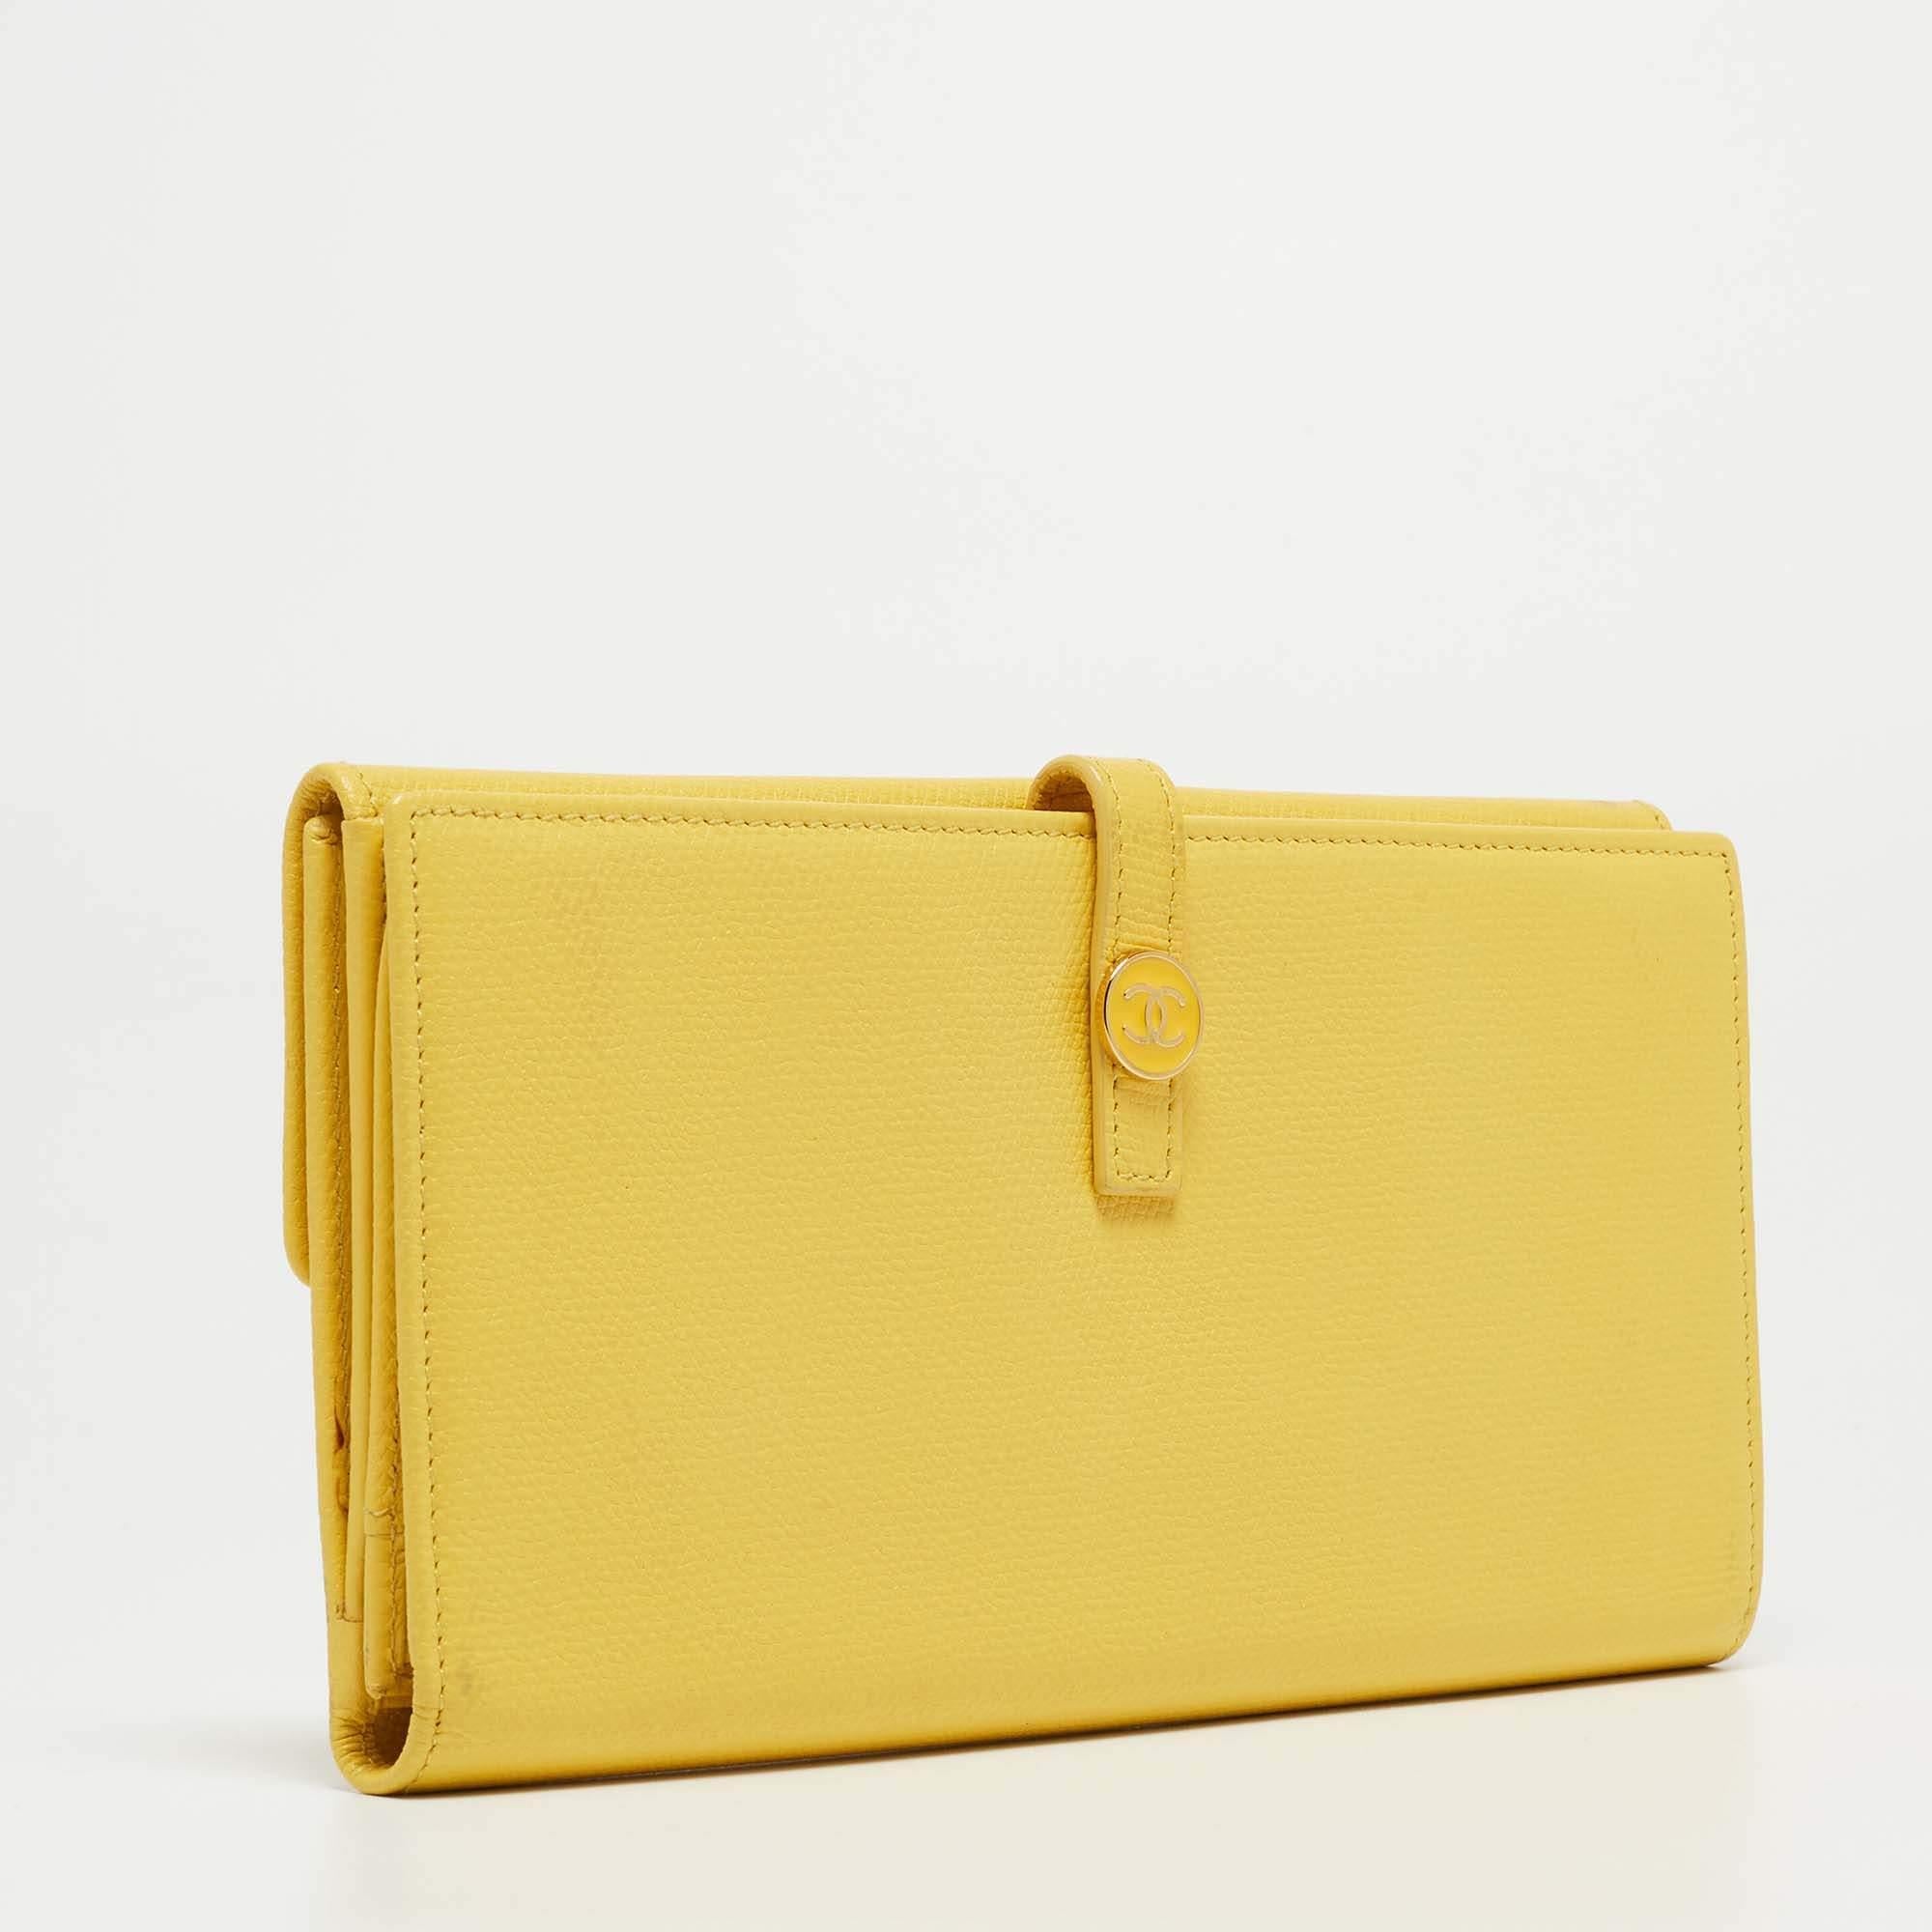 Chanel Yellow Leather CC Flap French Continental Wallet In Good Condition For Sale In Dubai, Al Qouz 2